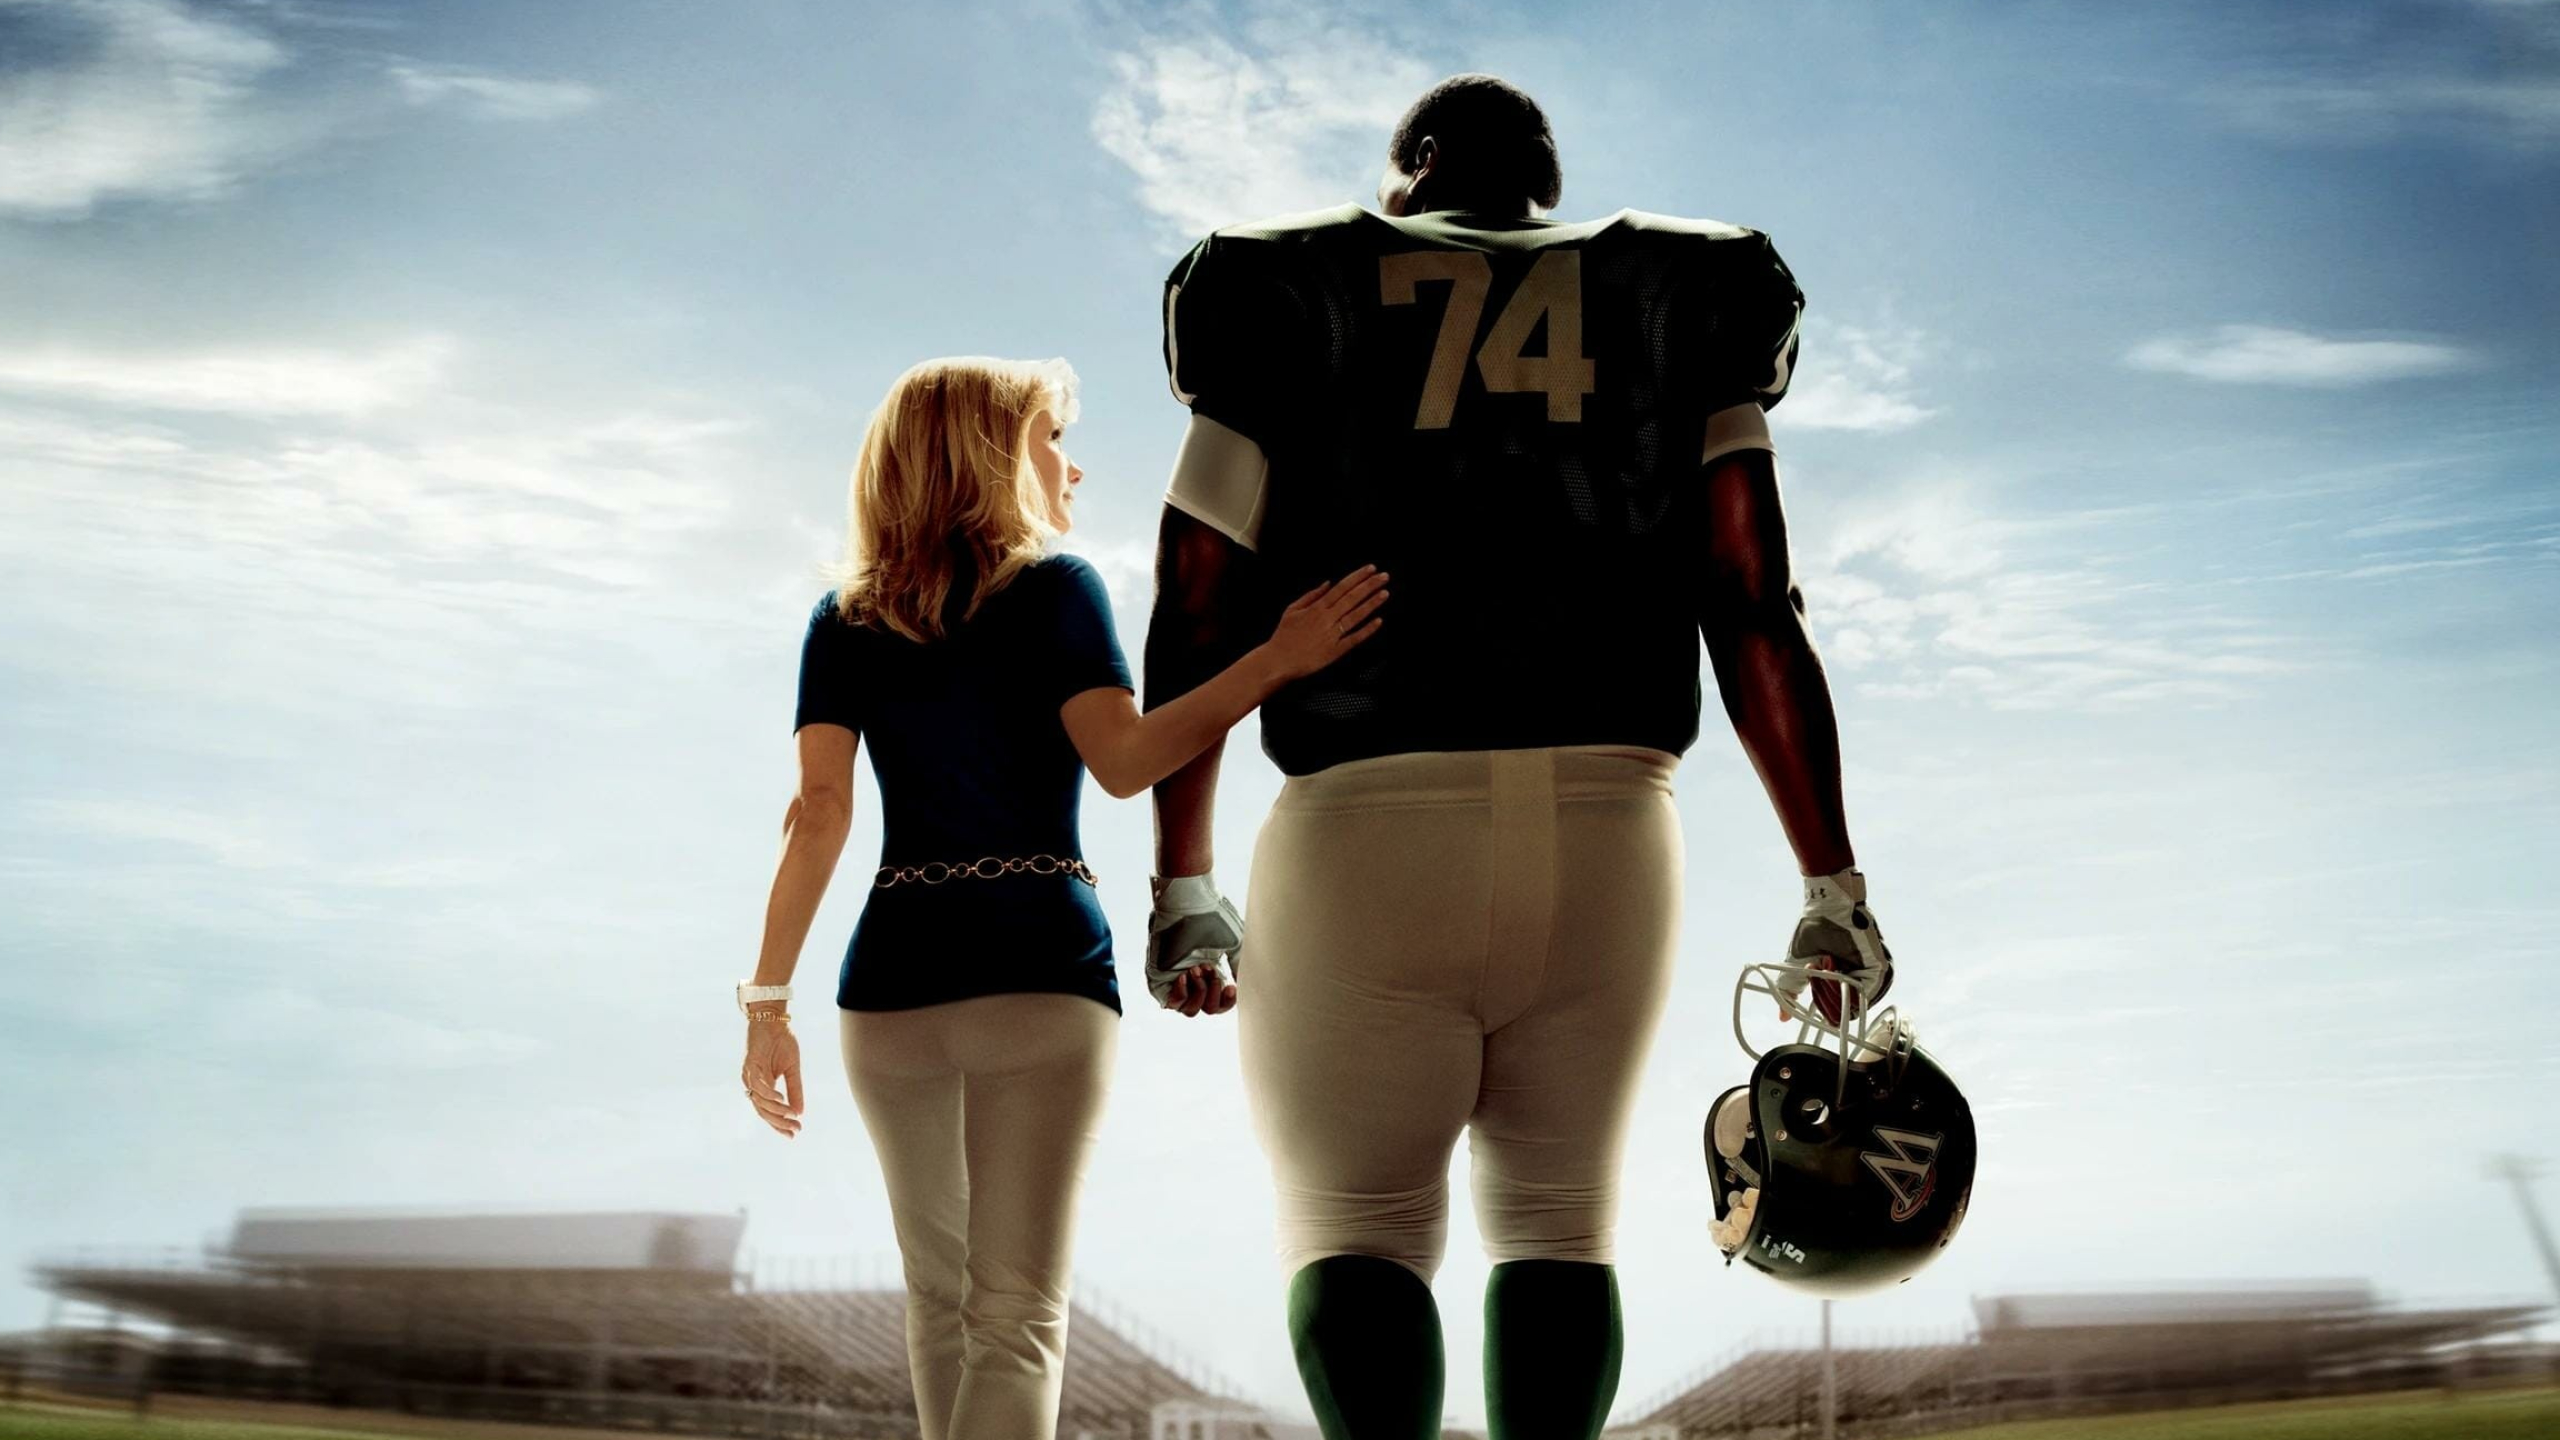 The Blind Side, Must-watch films, Showmax recommendations, Winter entertainment, 2560x1440 HD Desktop